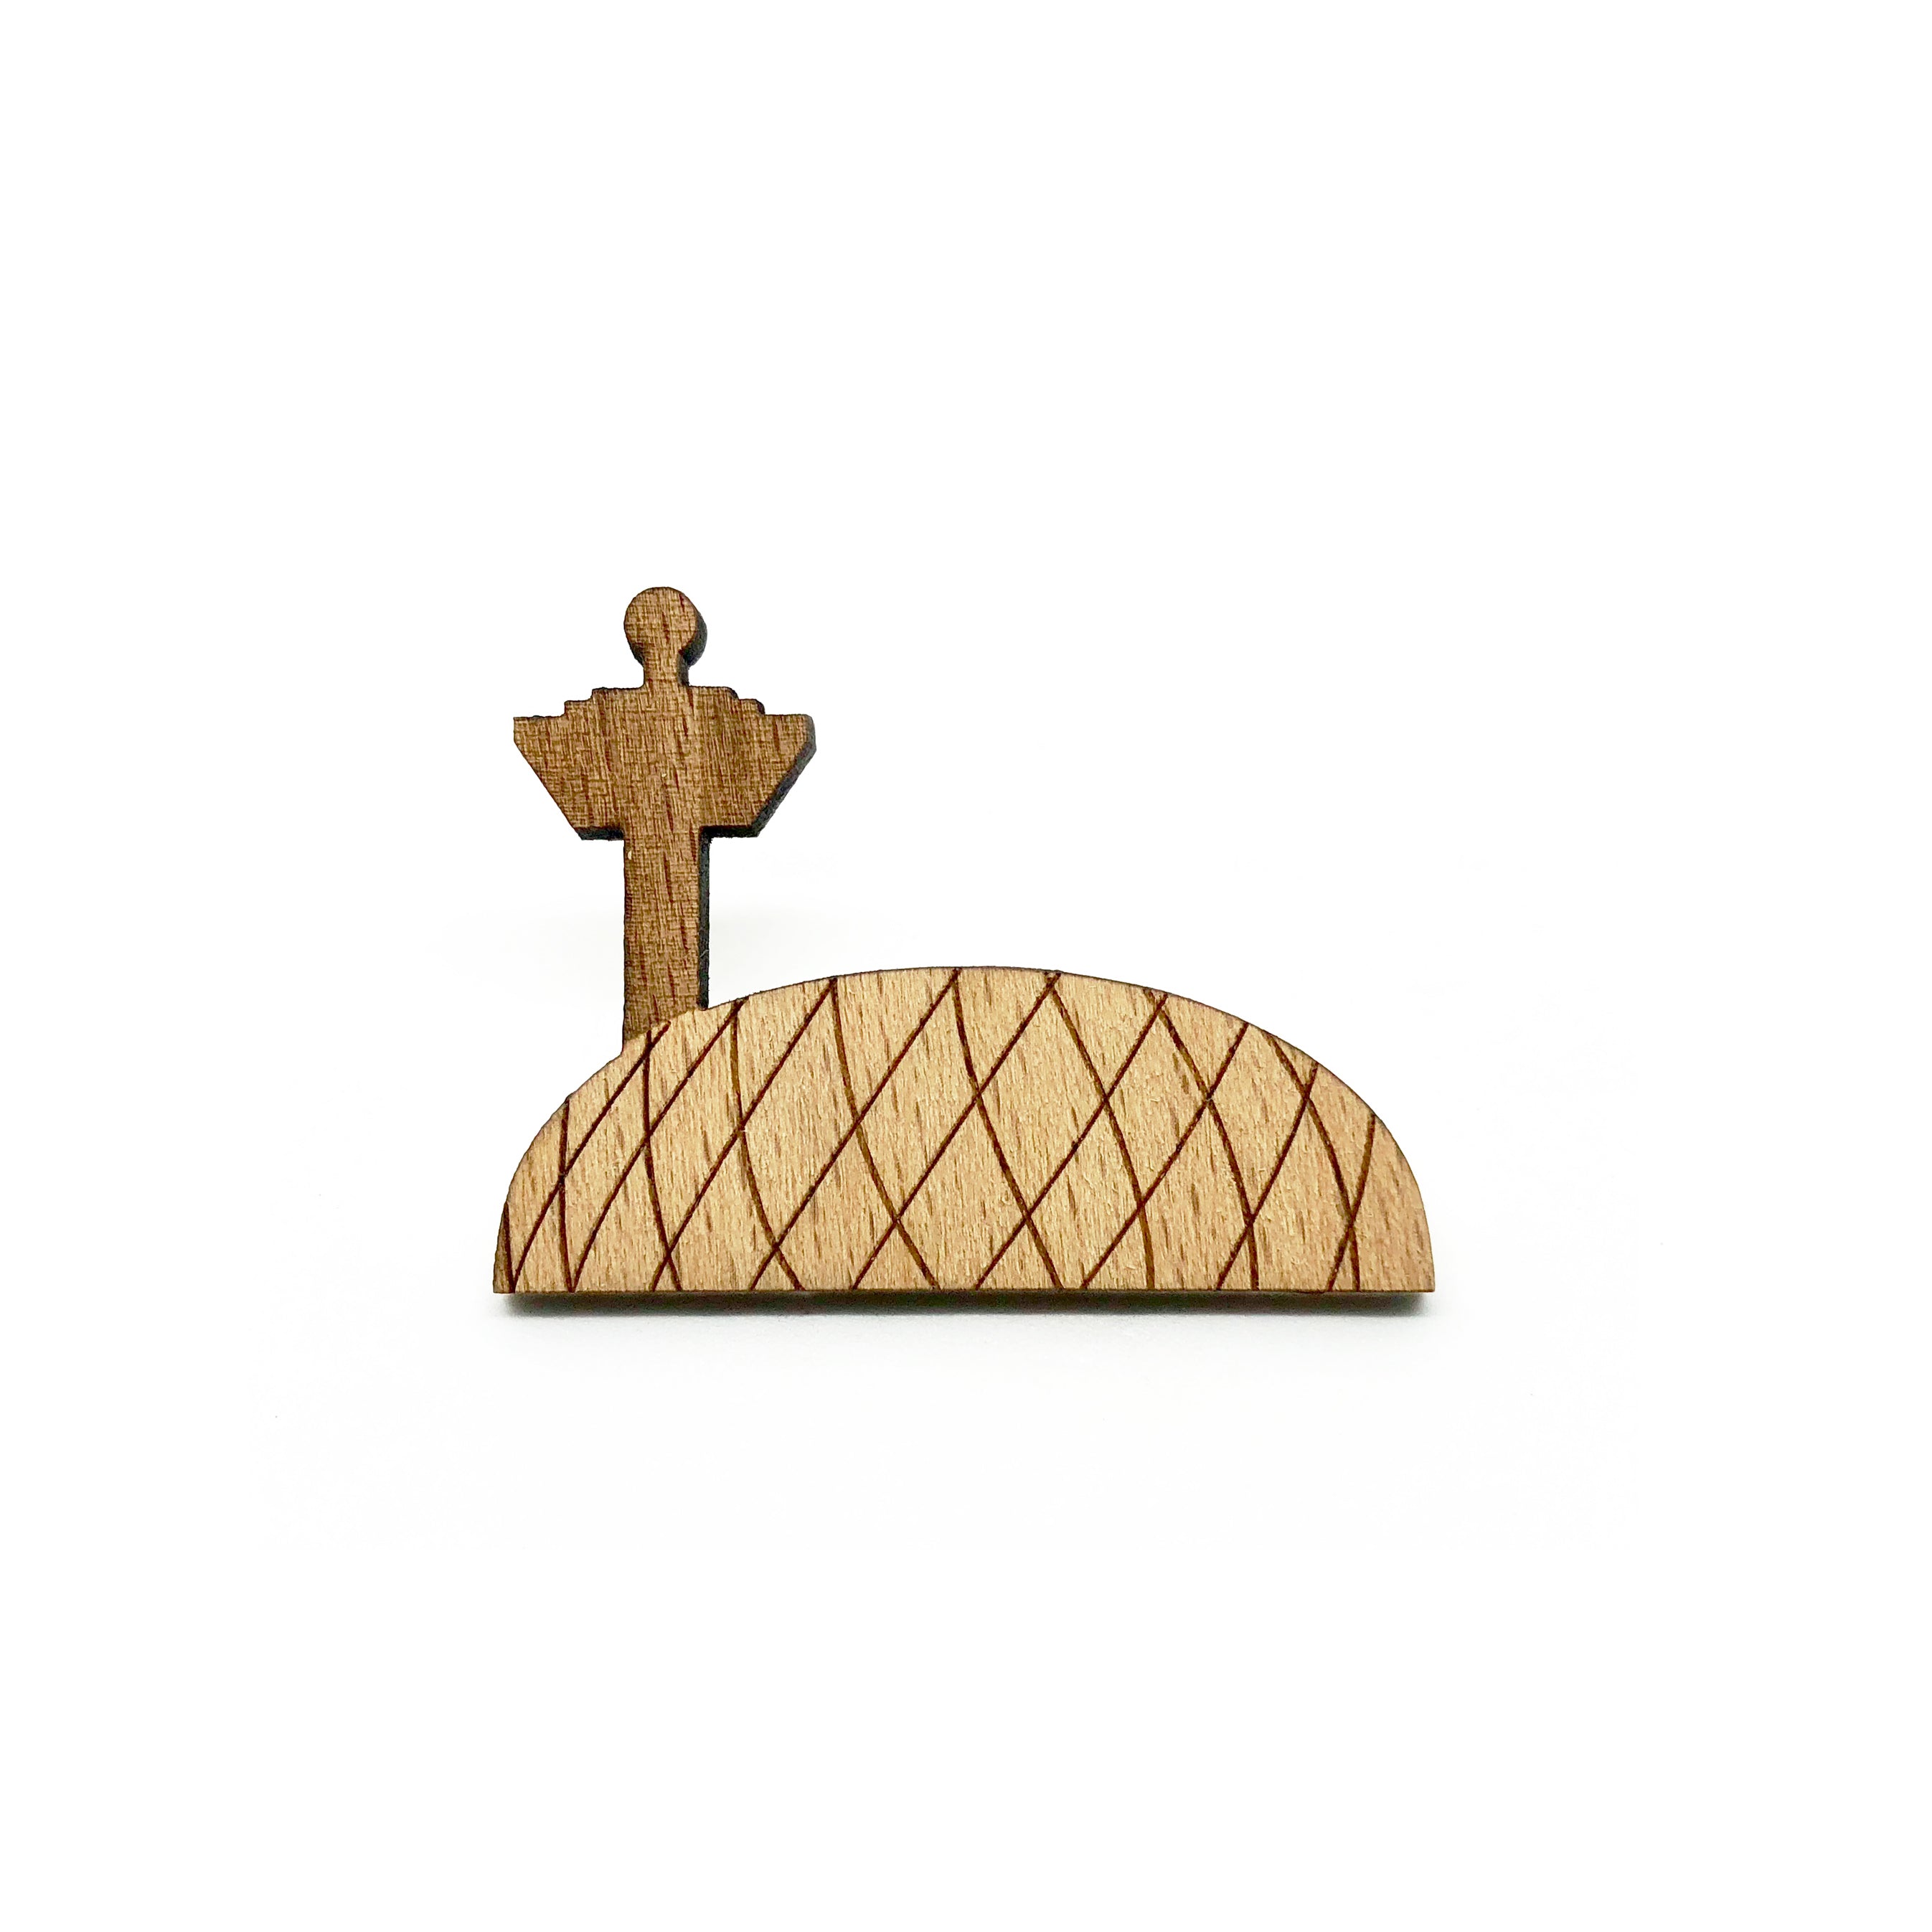 Jewel Changi Airport Wooden Brooch Pin - LM